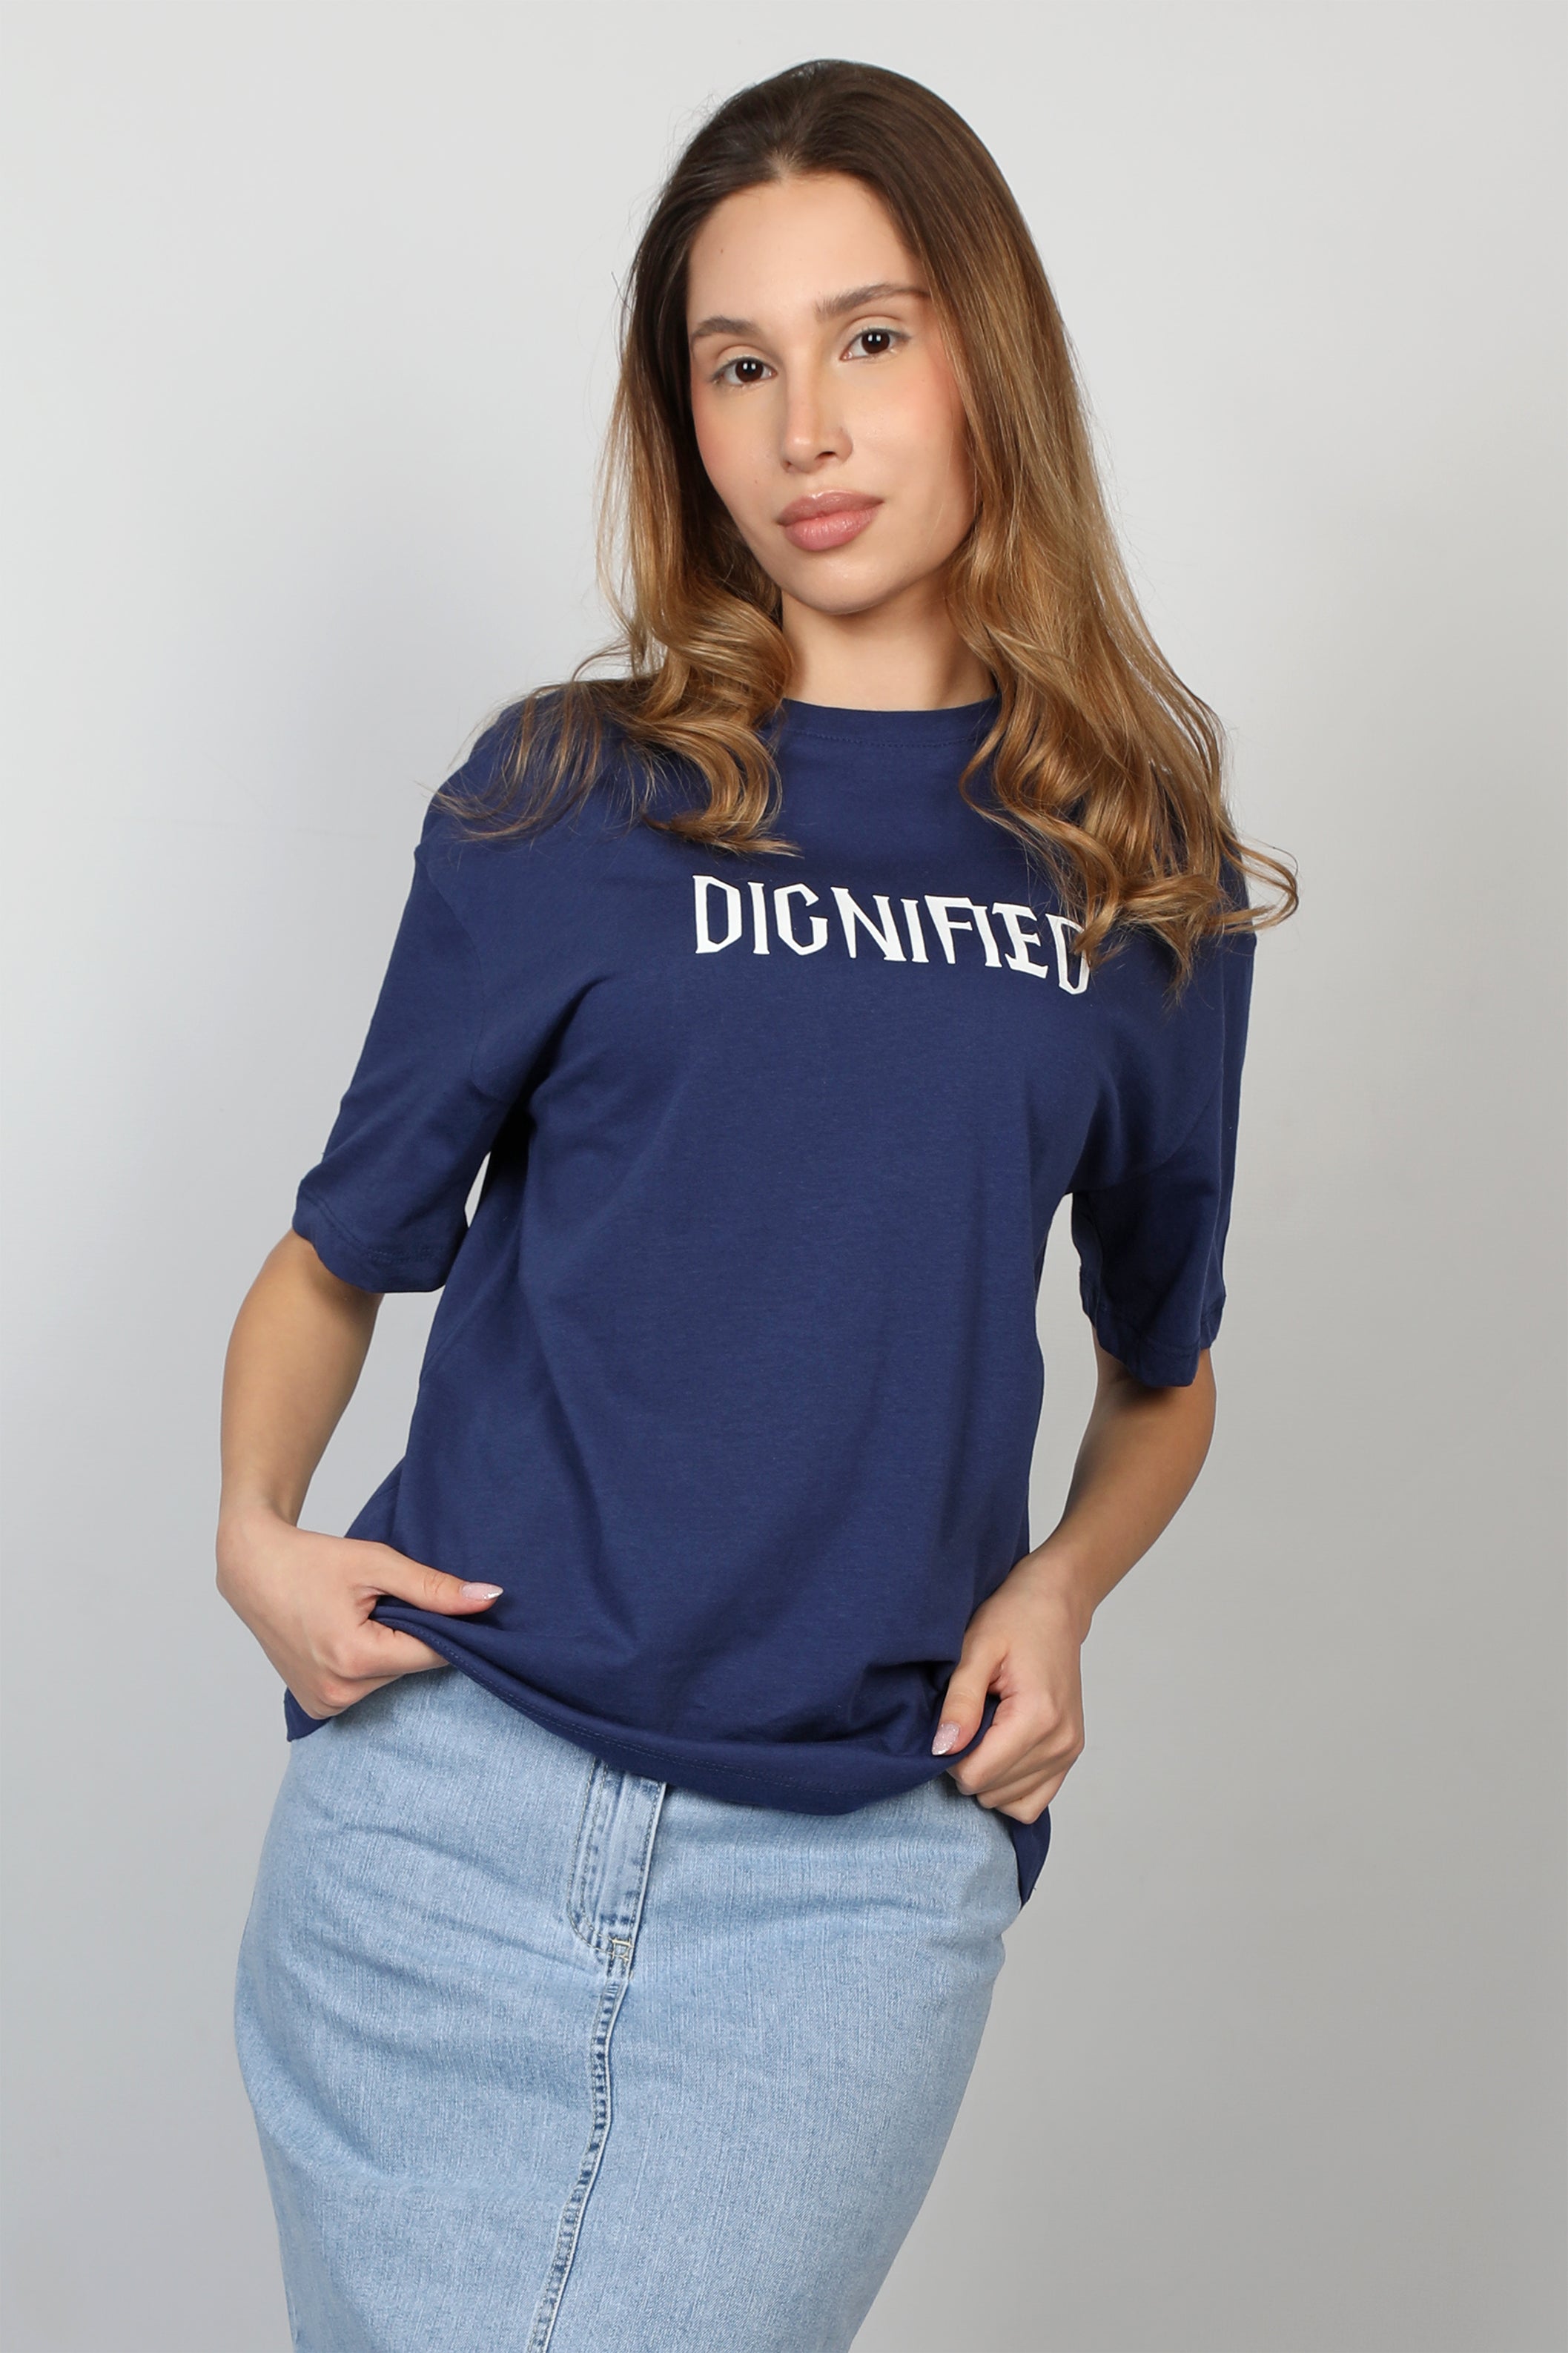 "DIGNIFIED" Printed Navy Oversized T-shirt